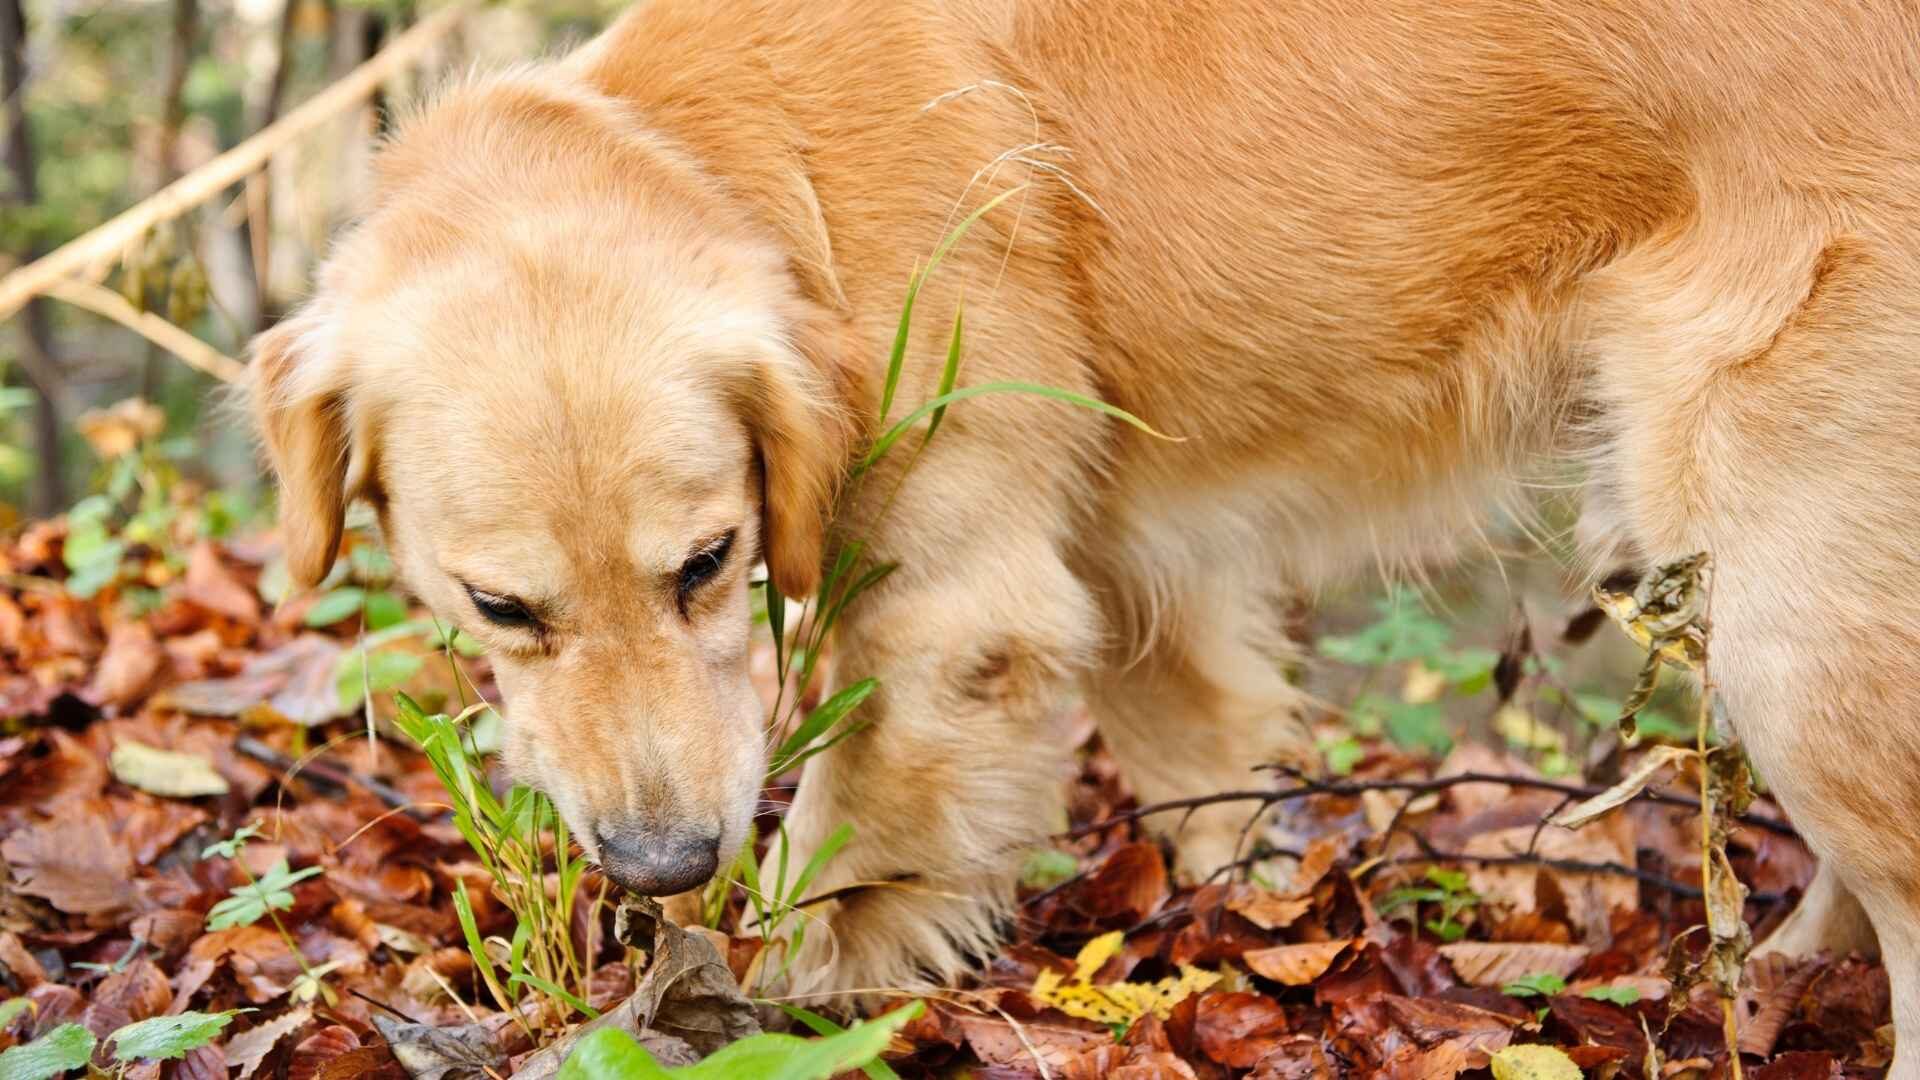 How to Get the Dog to Stop Eating Wood Chips: 5 Ways Guide